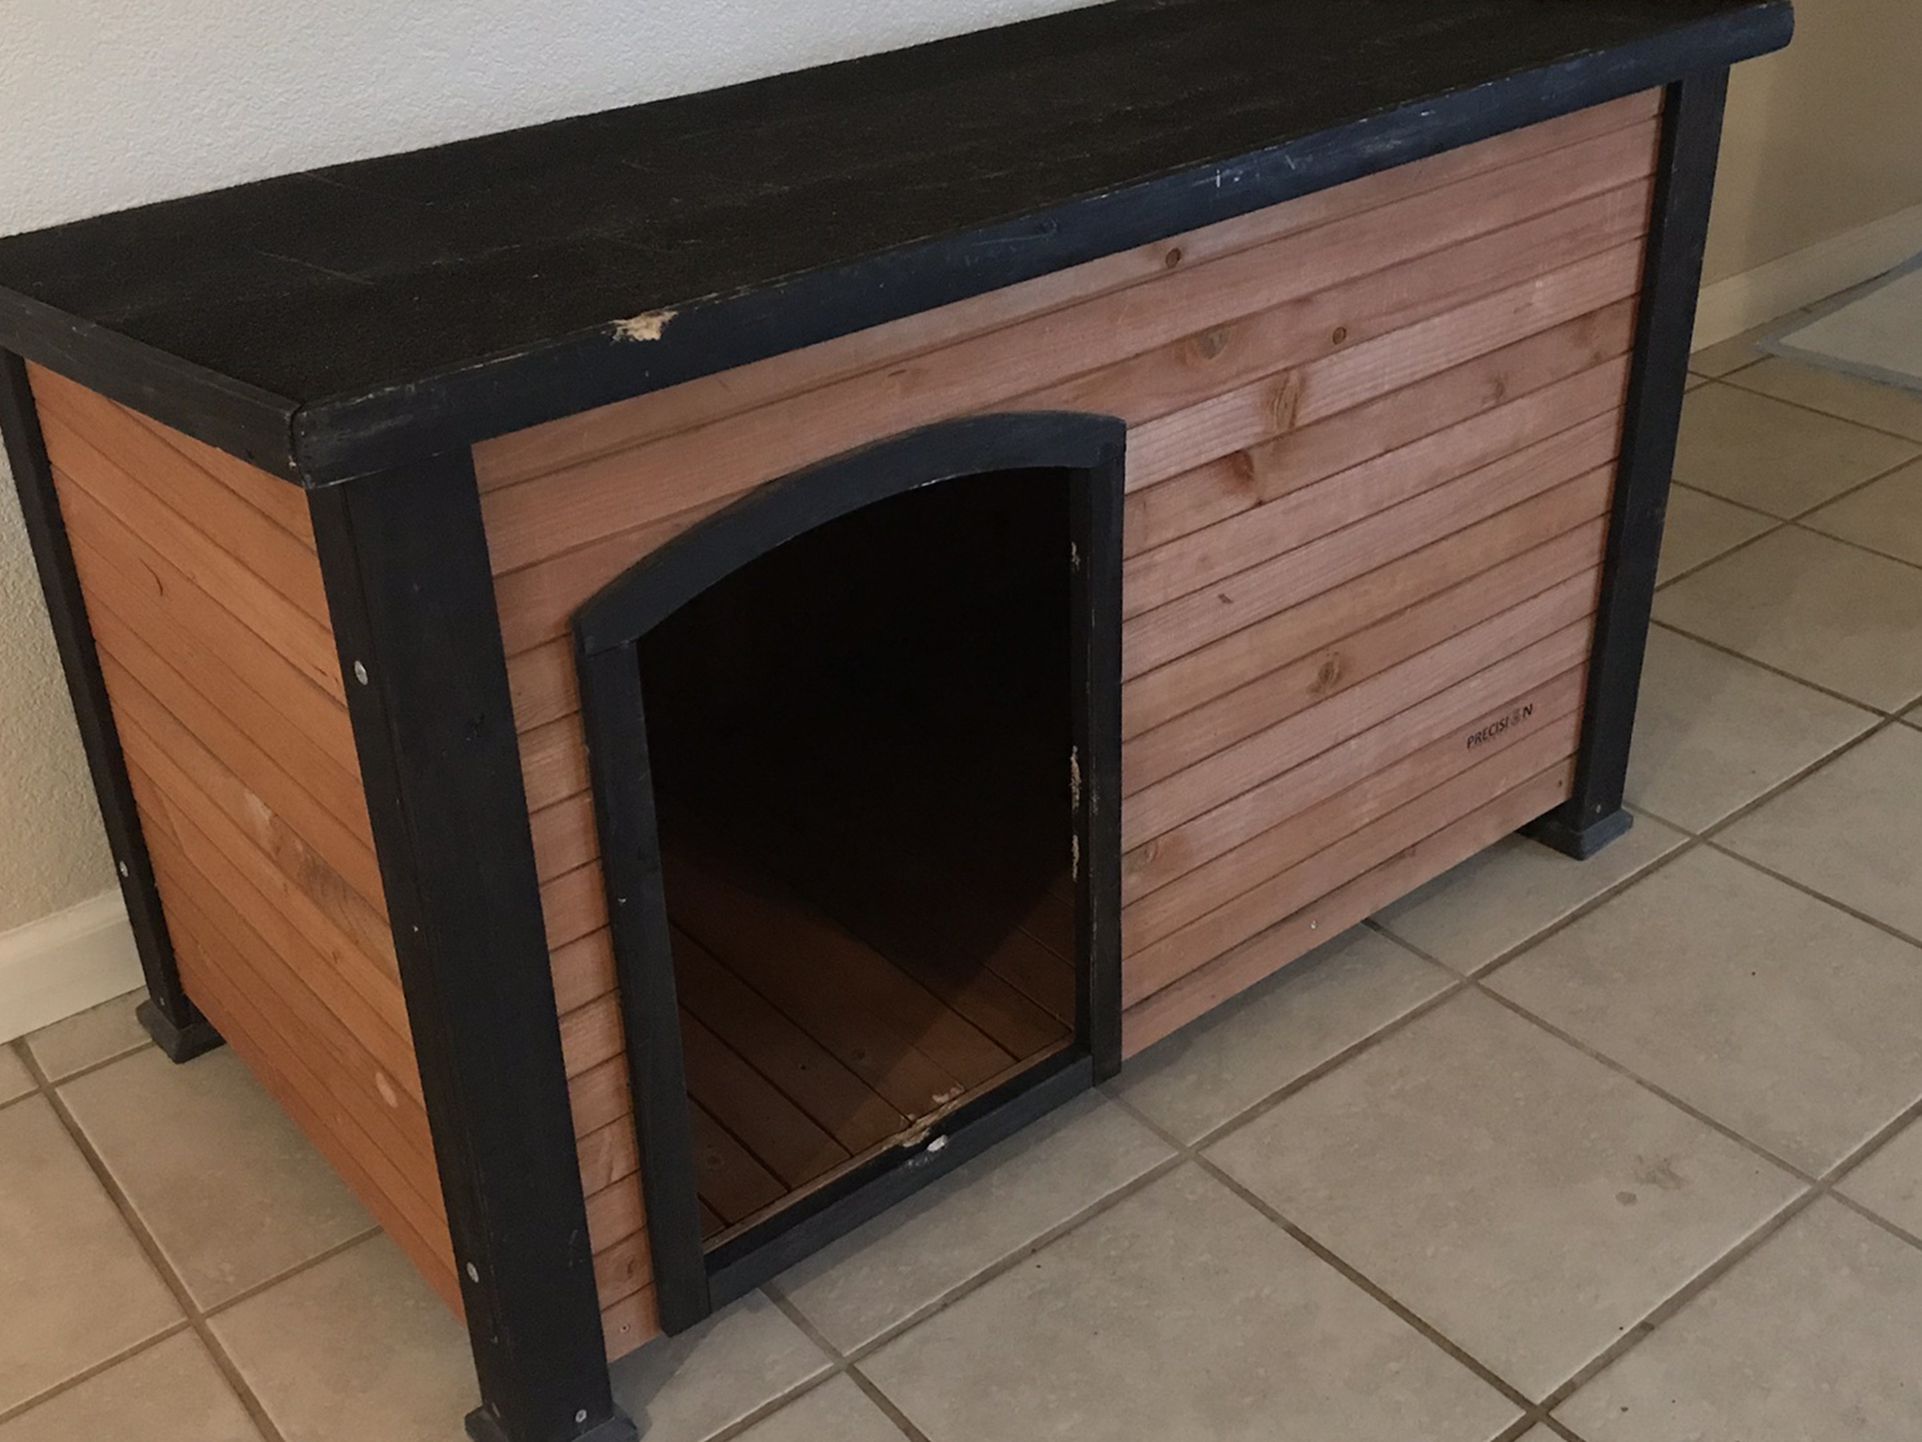 House for small and medium Dogs